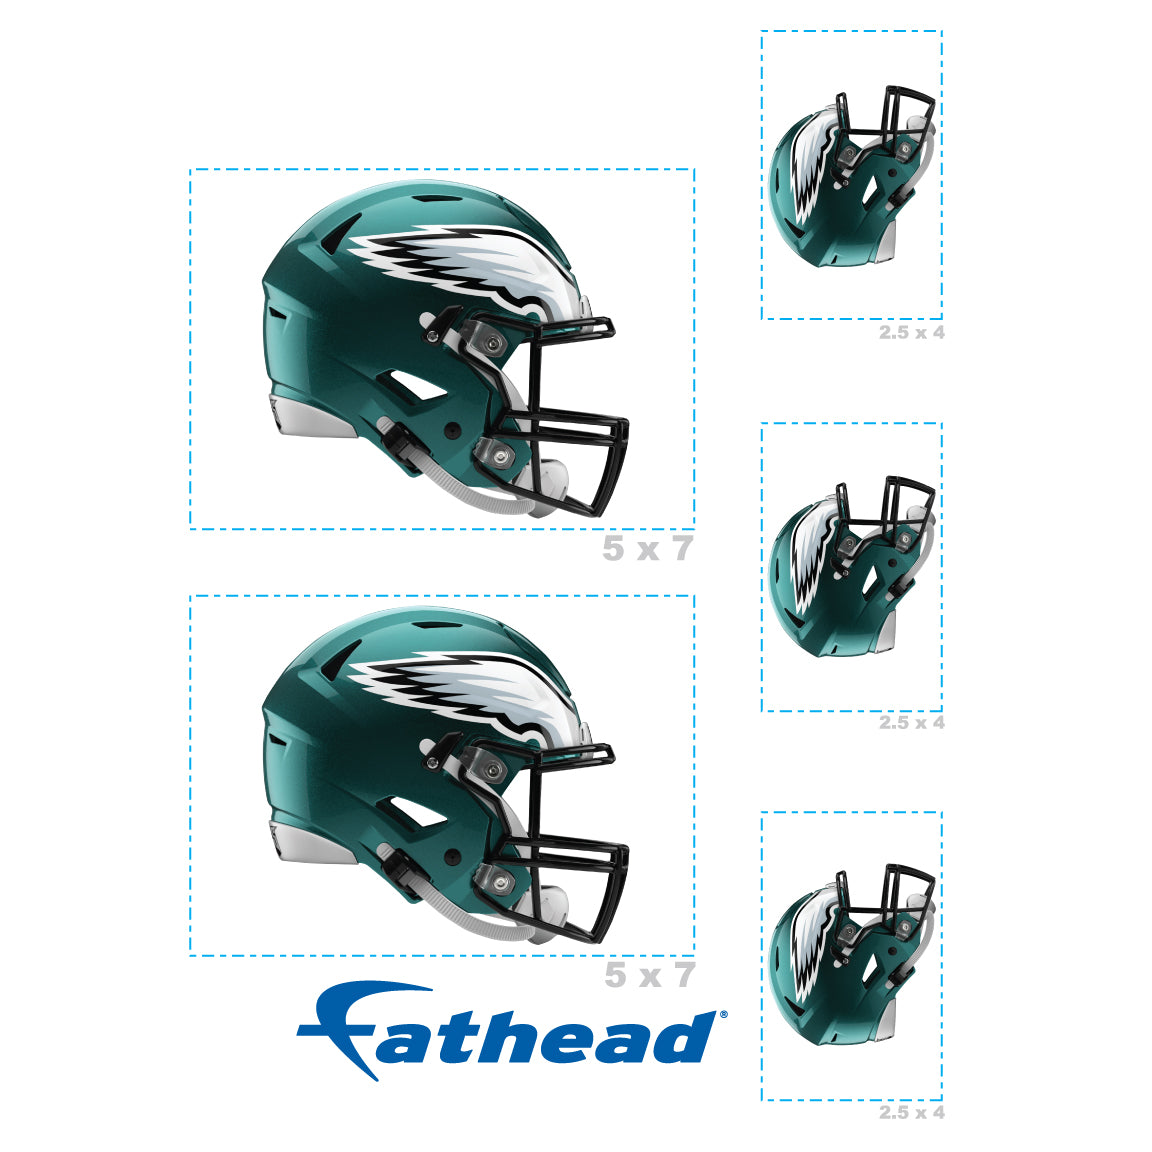 Philadelphia Eagles: Helmet Minis - Officially Licensed NFL Removable Adhesive Decal